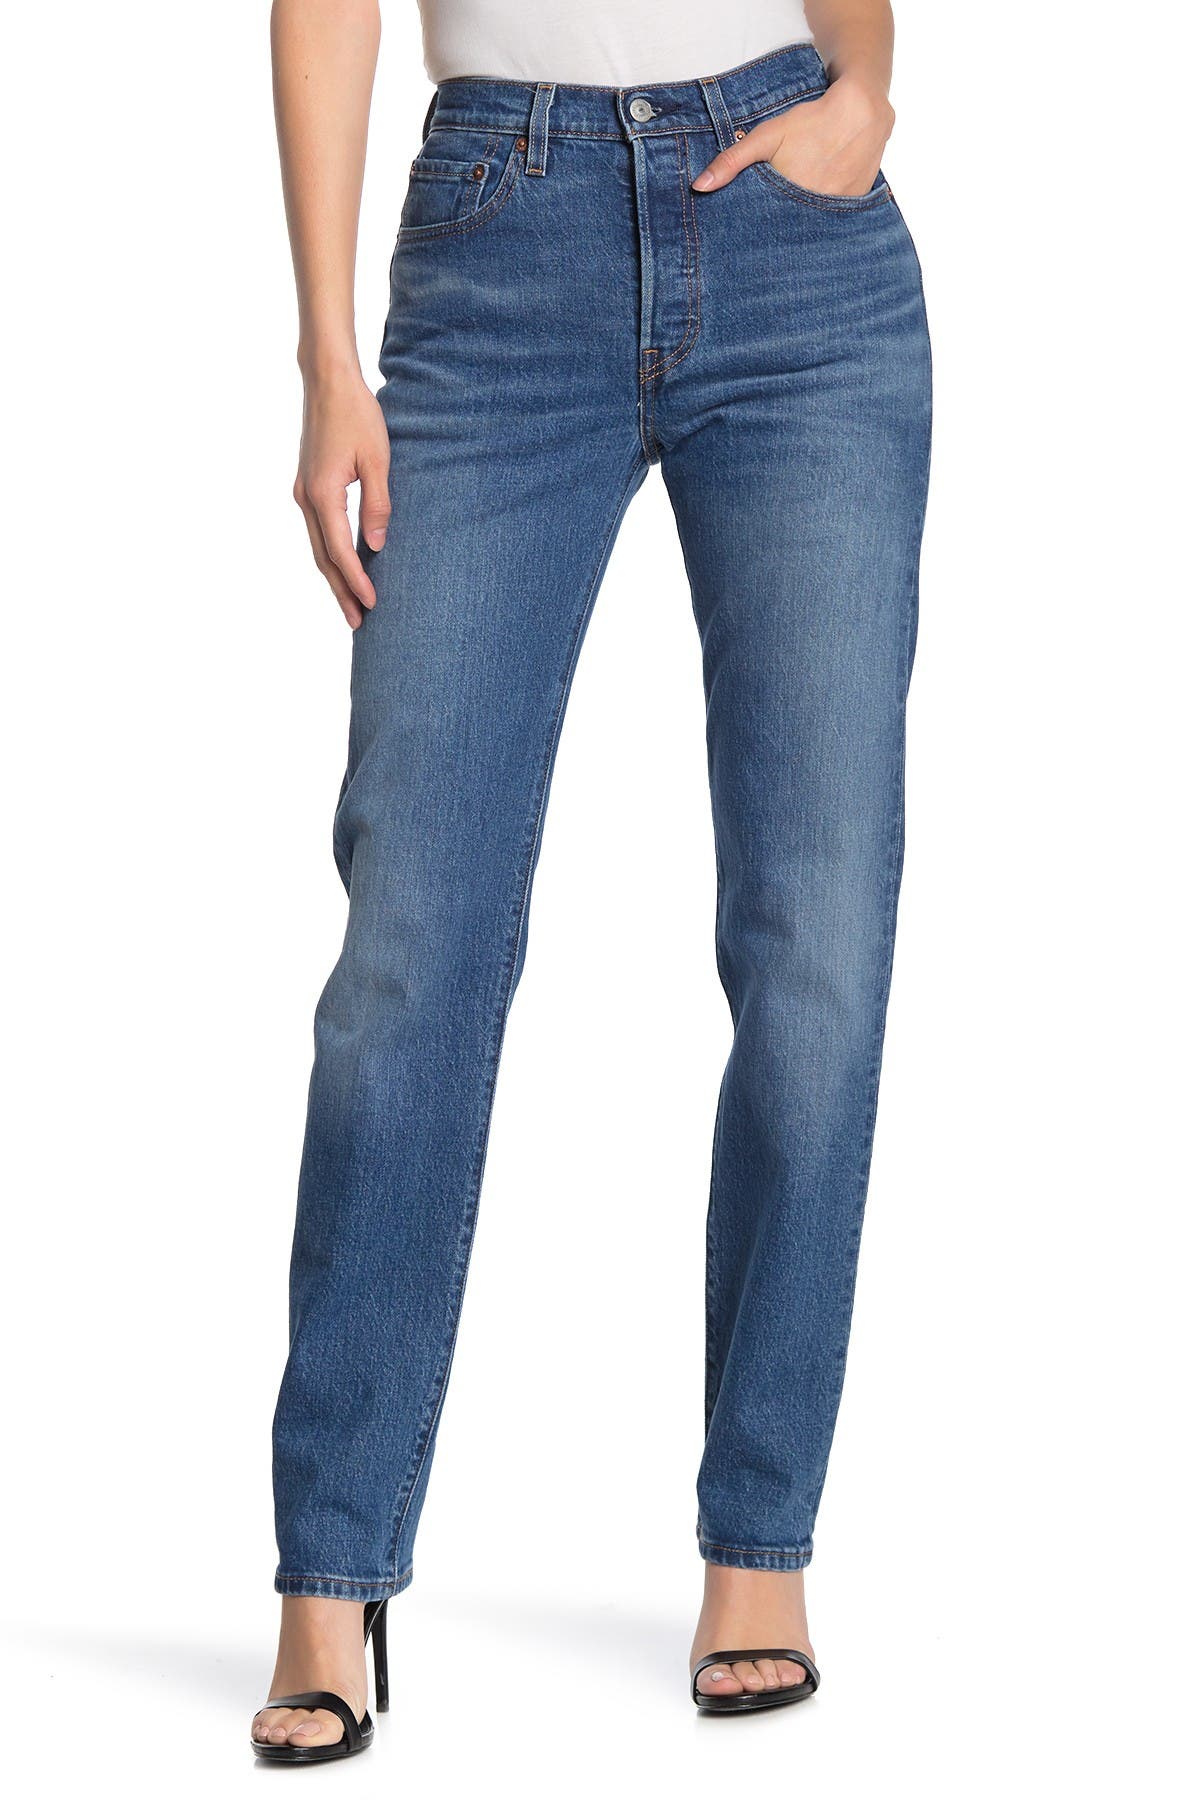 nordstrom rack high waisted jeans